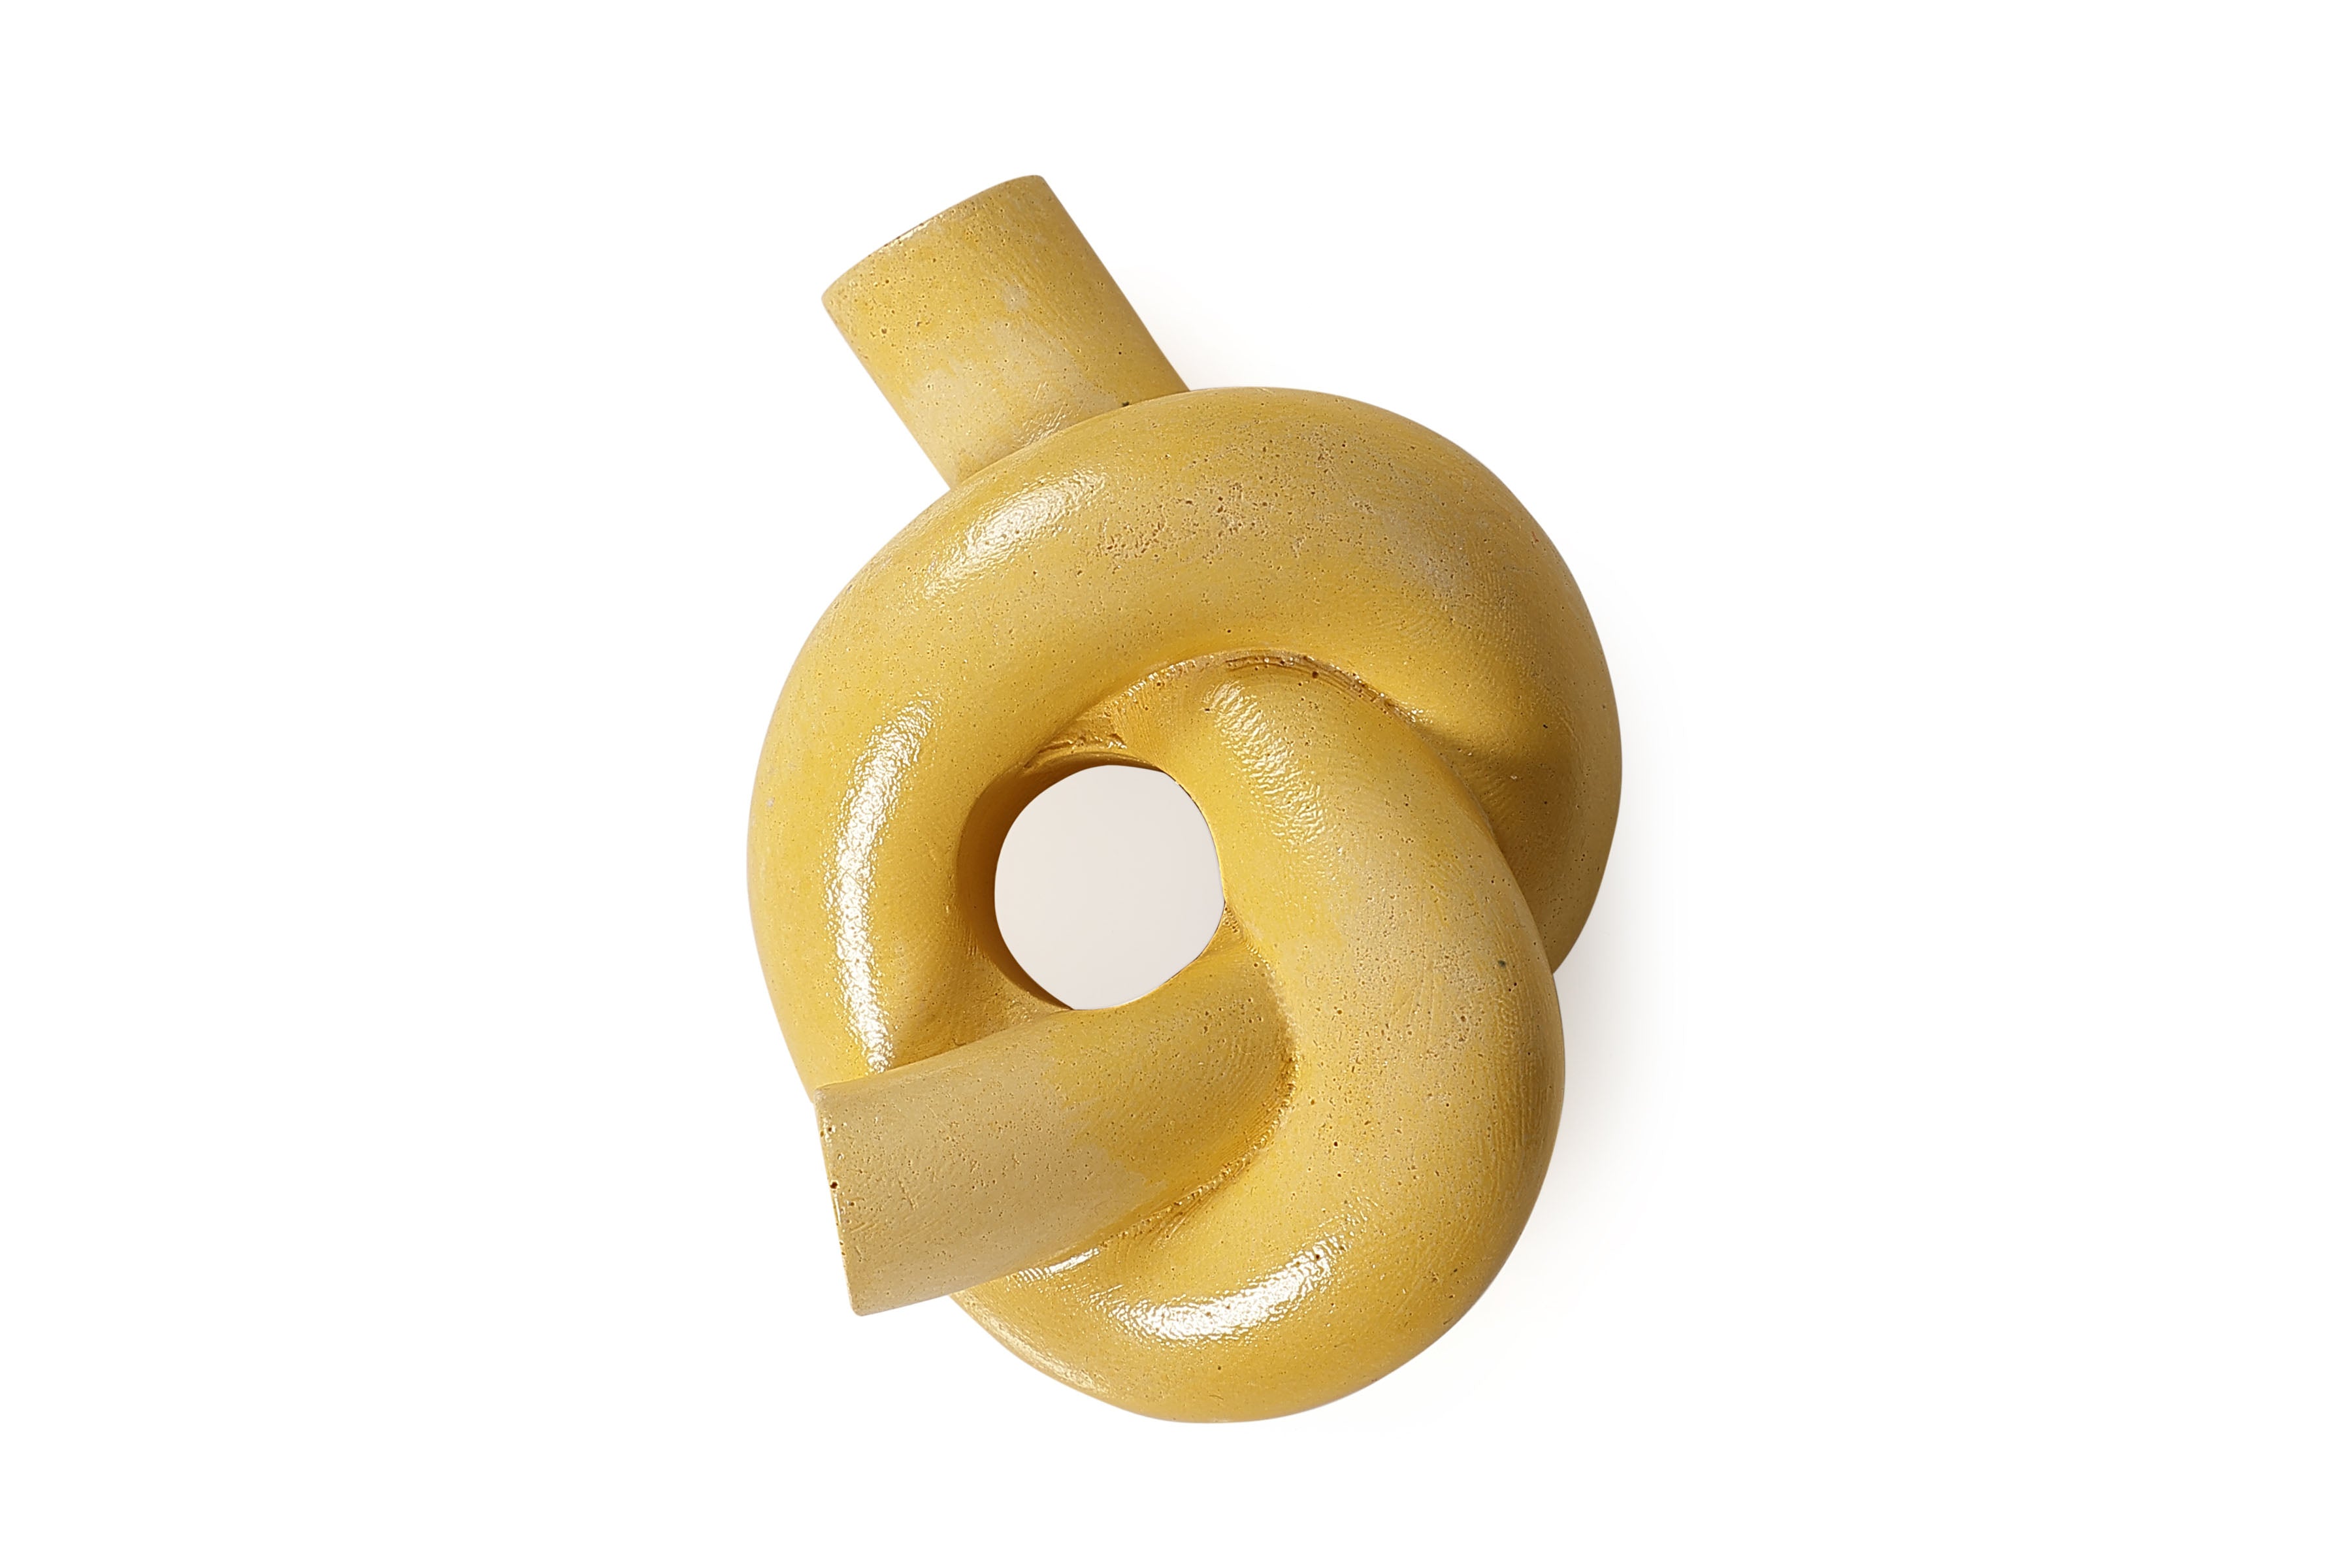 Nordic Style Knot Concrete Candle Holder - Mustard Yellow 3.2x4.5 Inch (Set of 2)